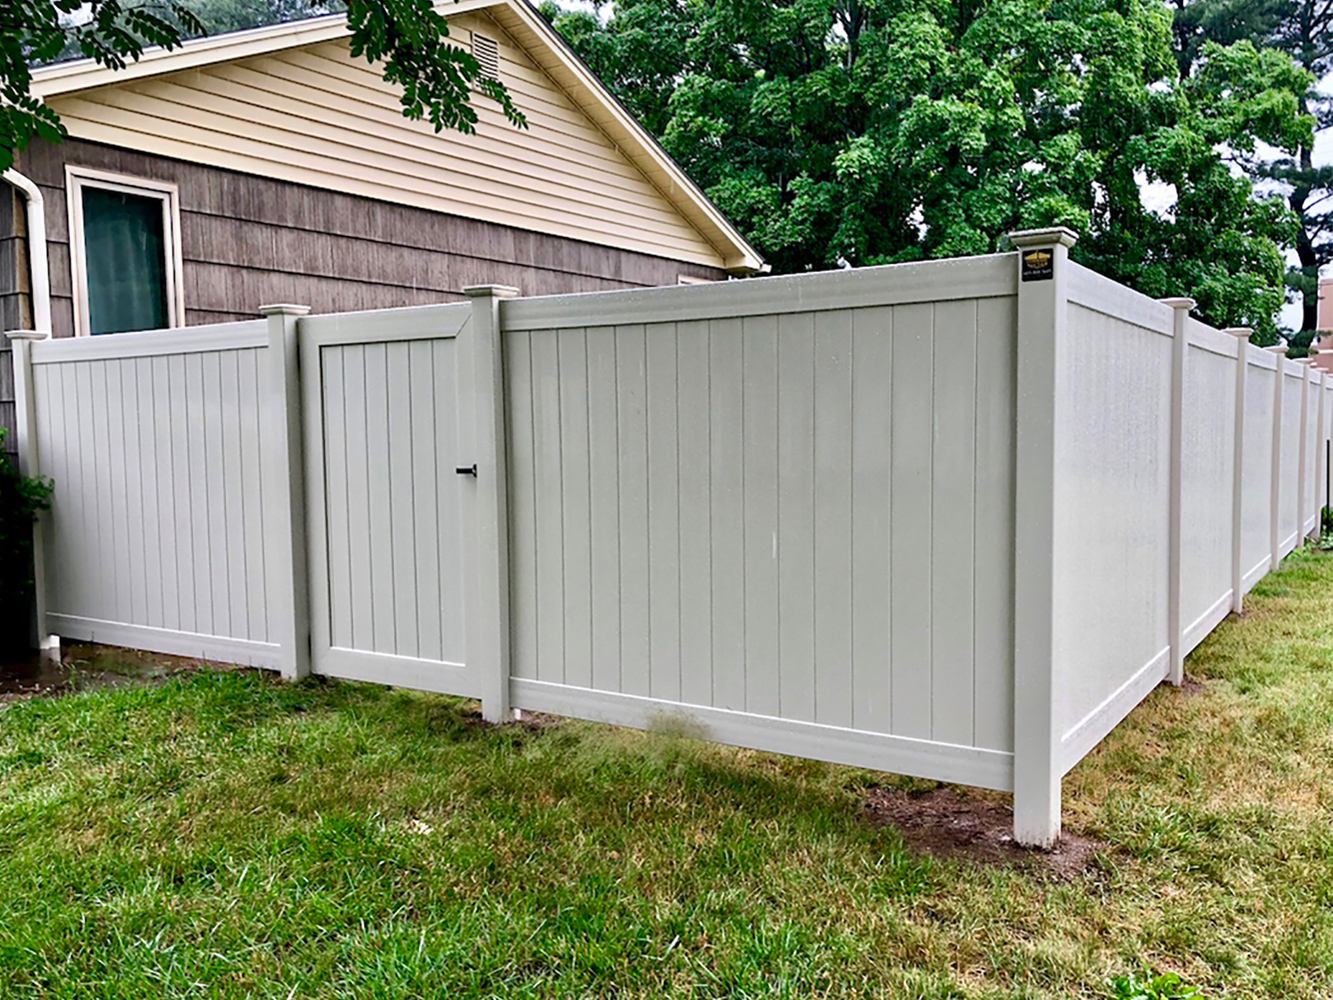 Photo of a vinyl privacy fence at a residential yard